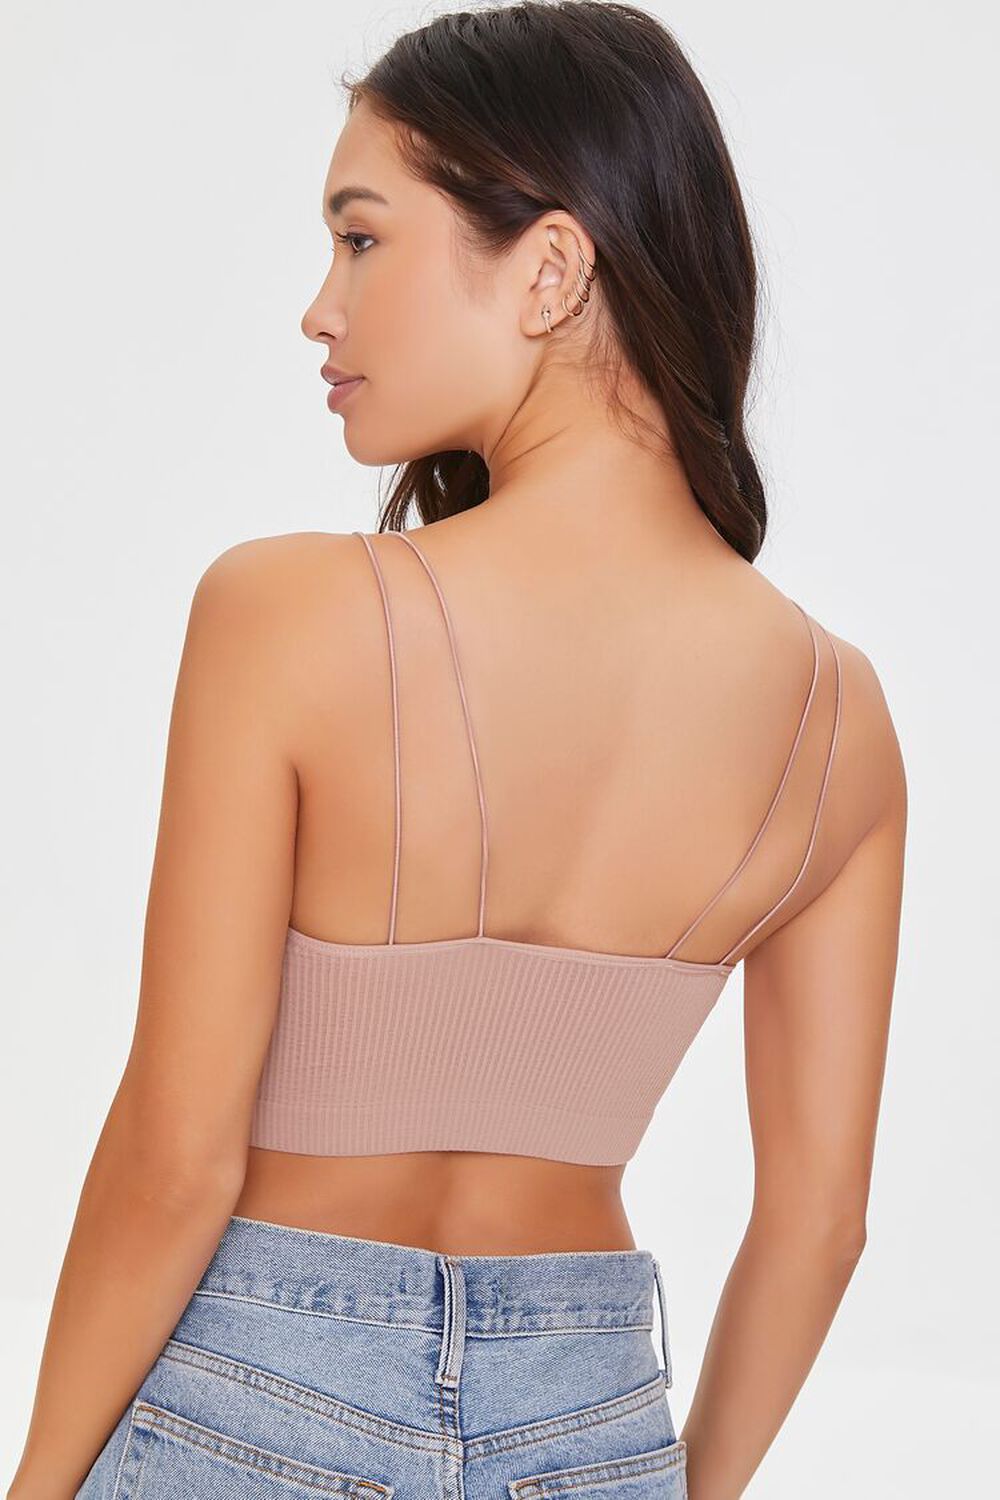 TAUPE Dual Cami Strap Bralette, image 3